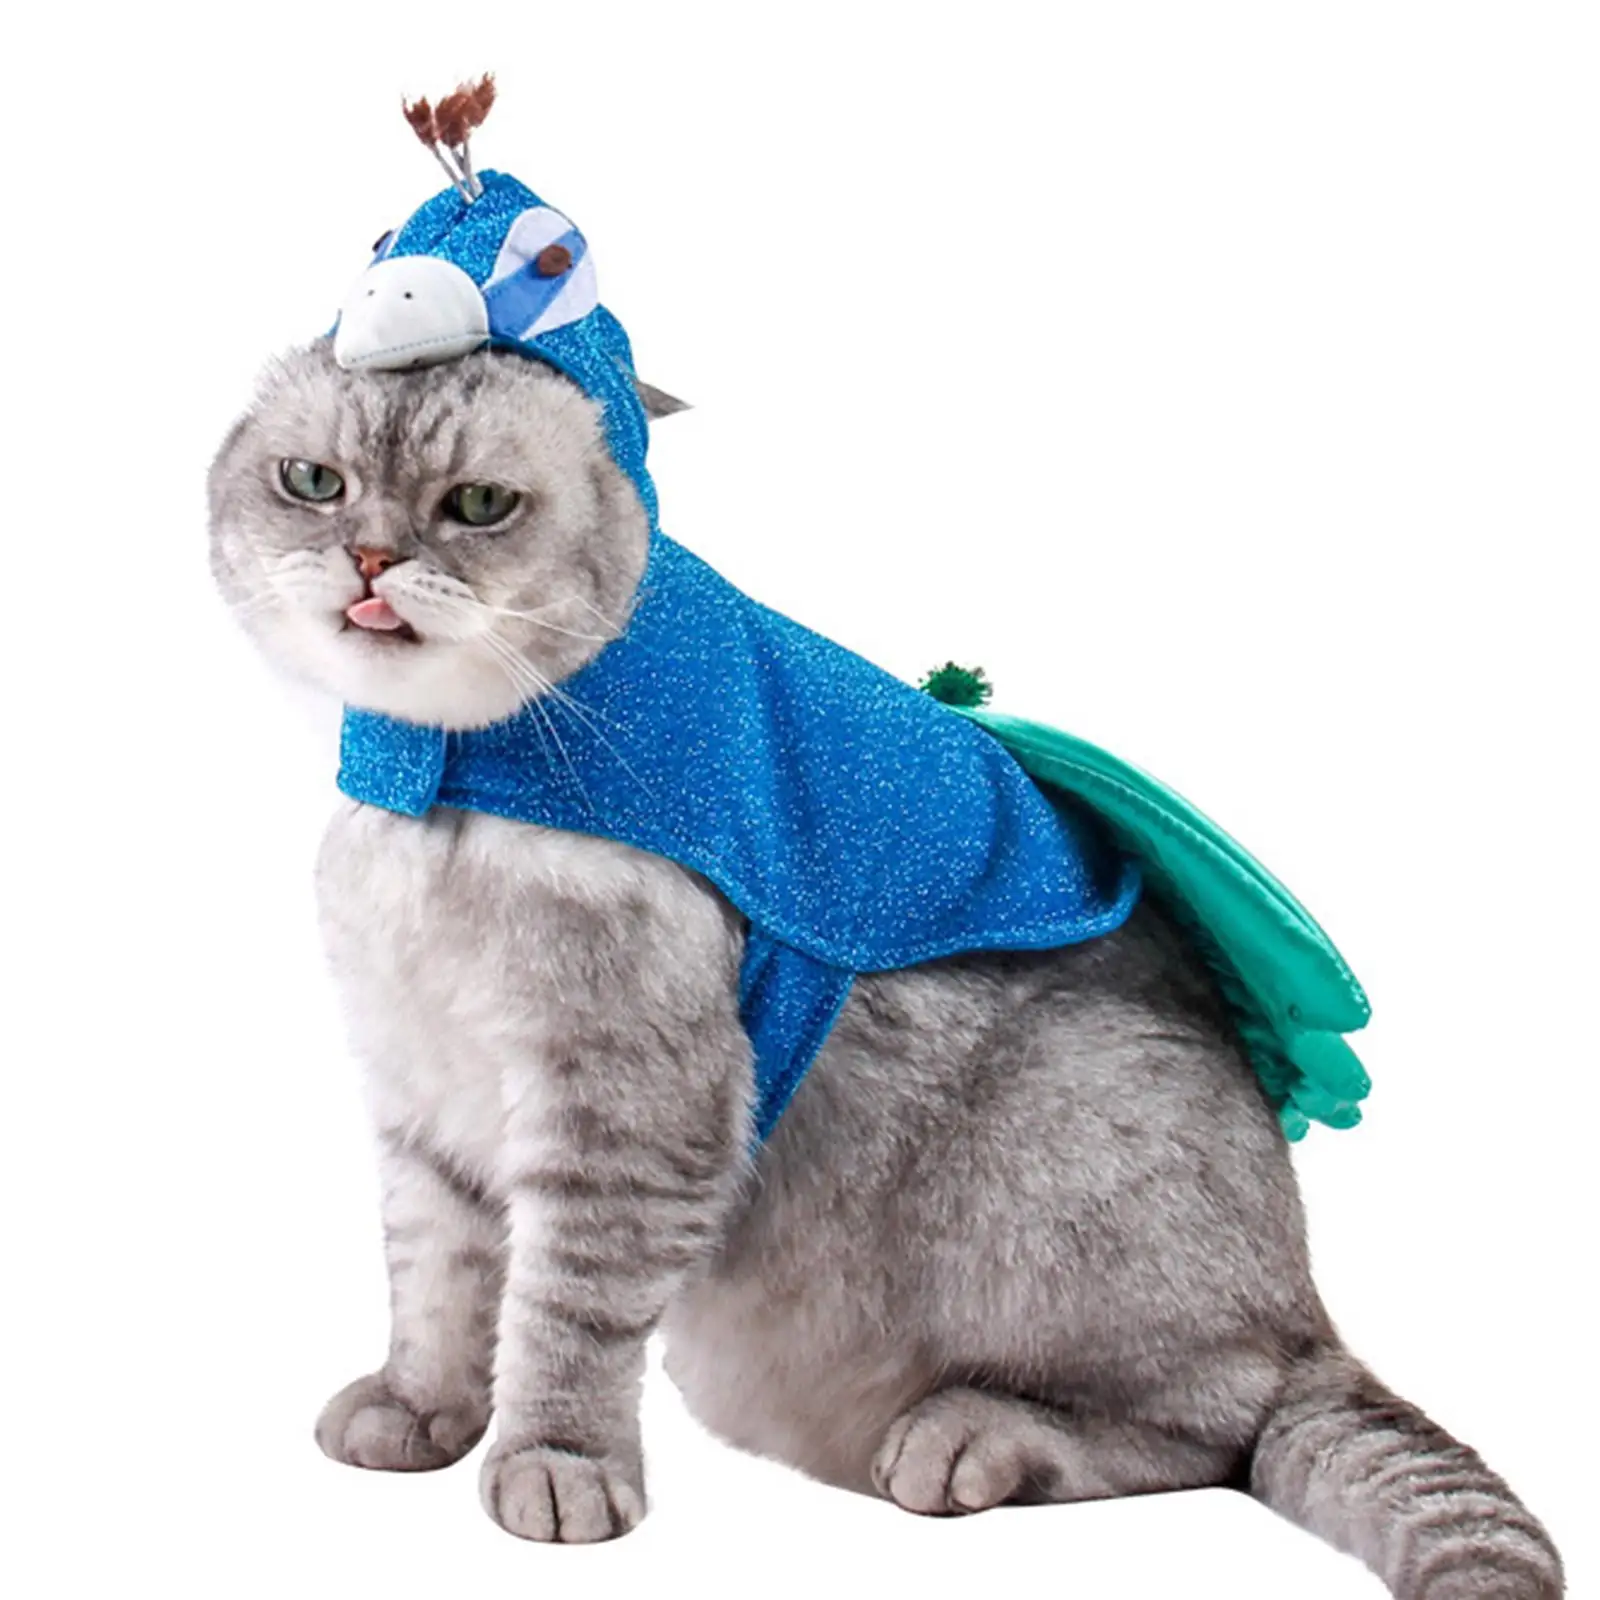 Cute Cat Peacock Costume Headwear Outfit Jacket Apparel Clothing Pet Clothes for Small Dogs Cosplay Festival Holiday Photograph